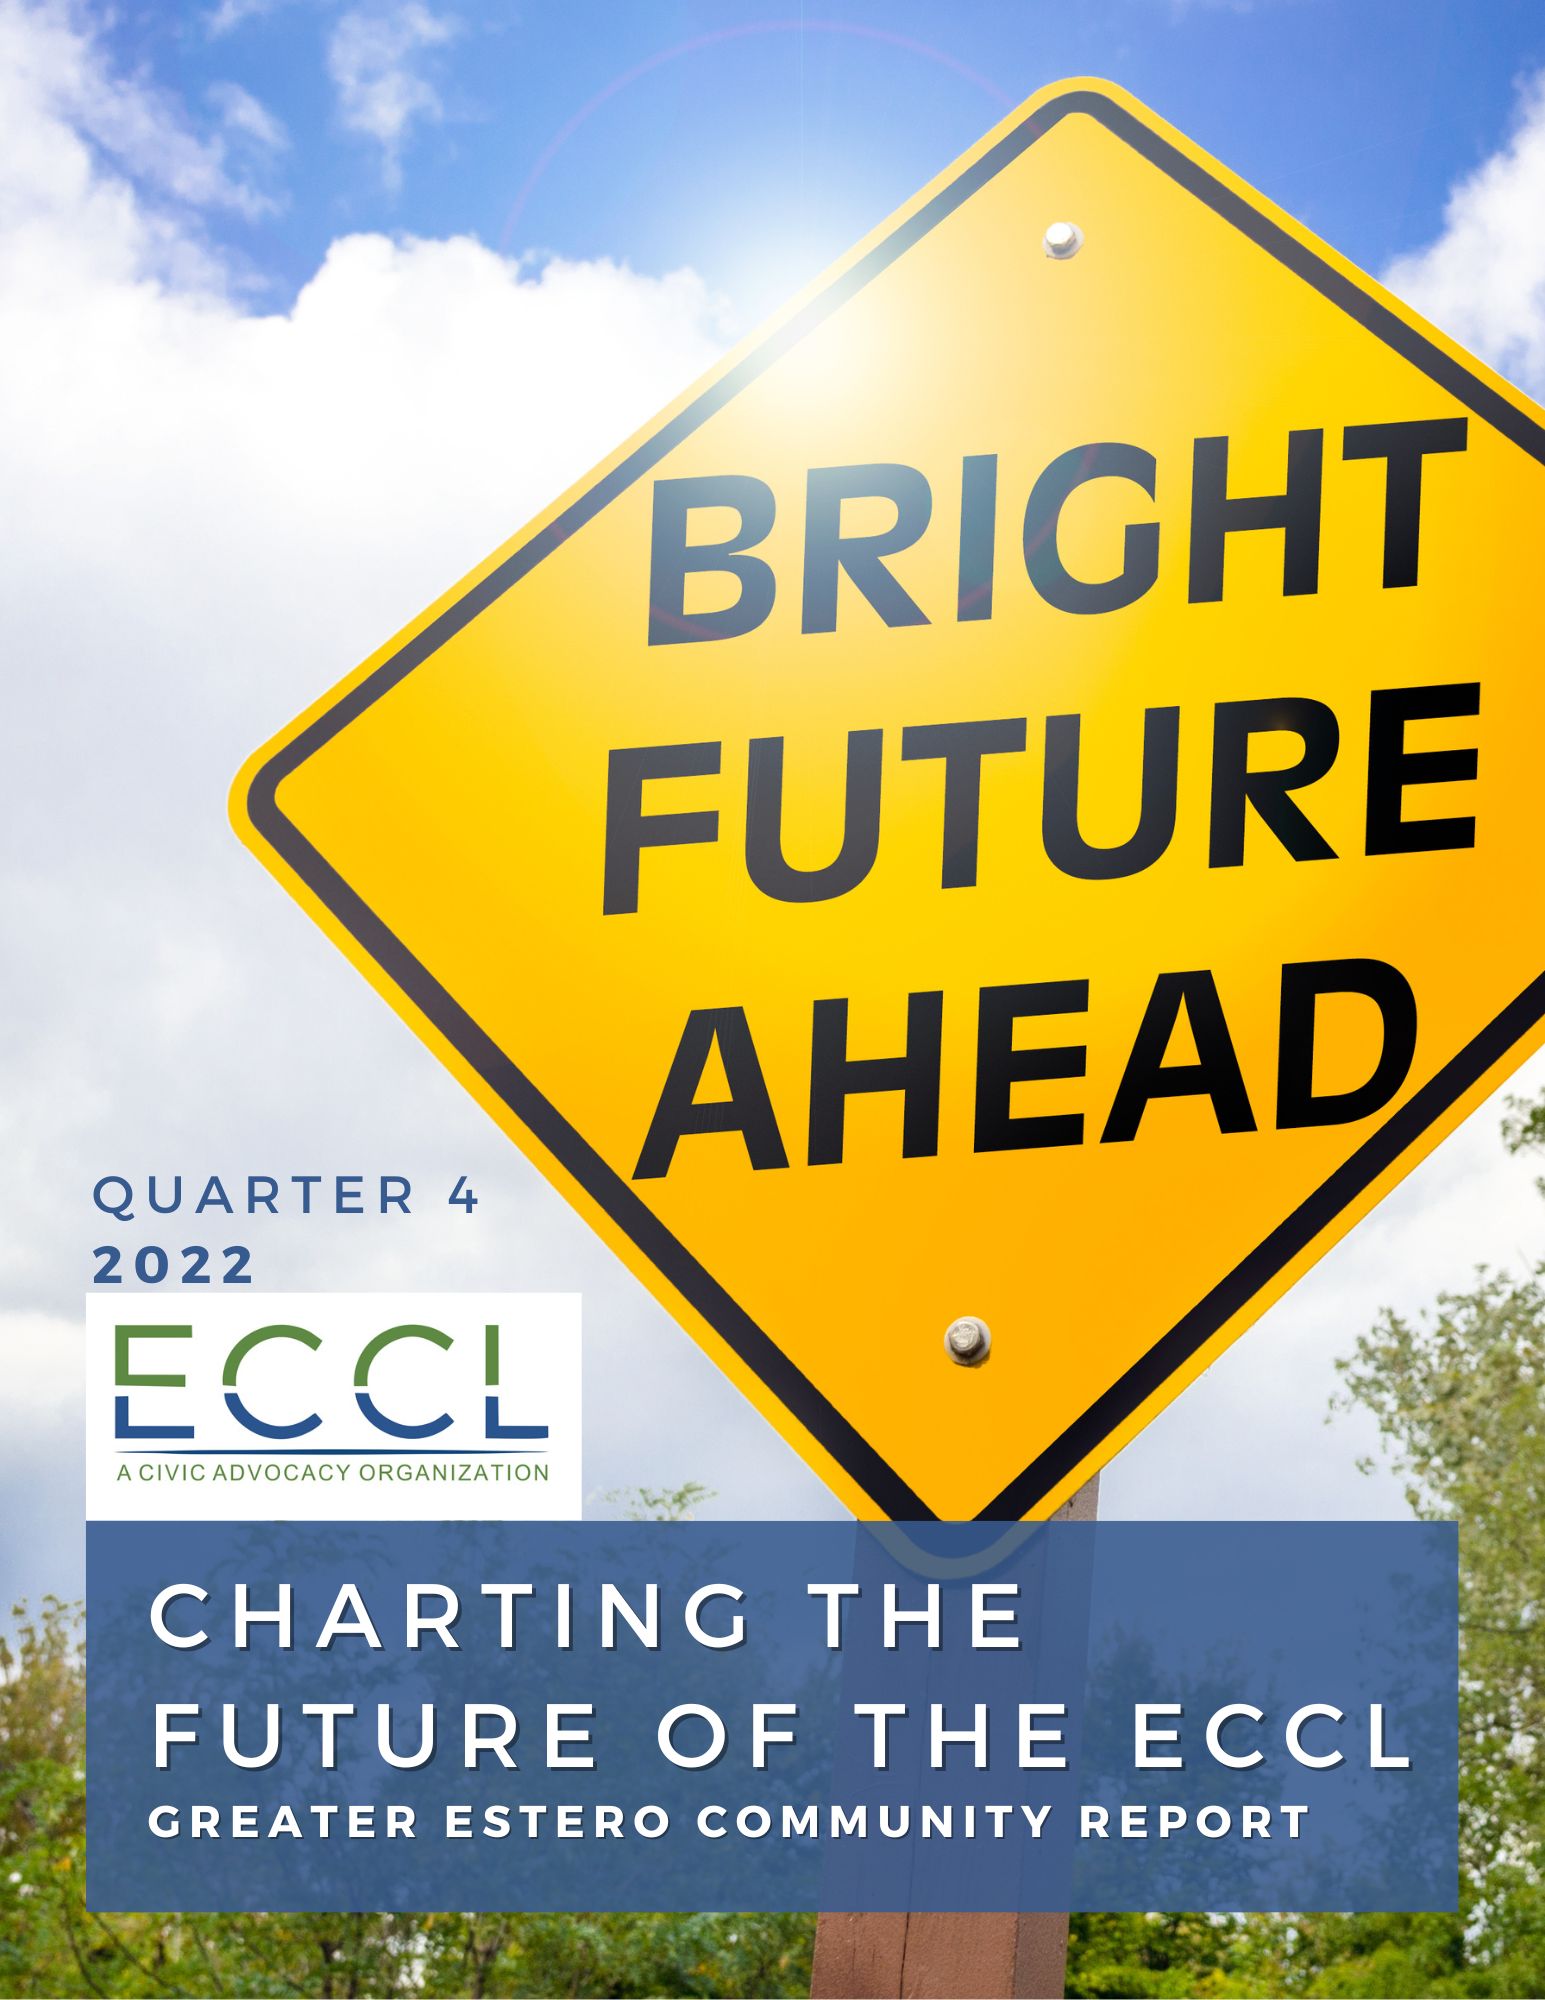 Charting the Future of the ECCL: GECR Quarter 4, 2022